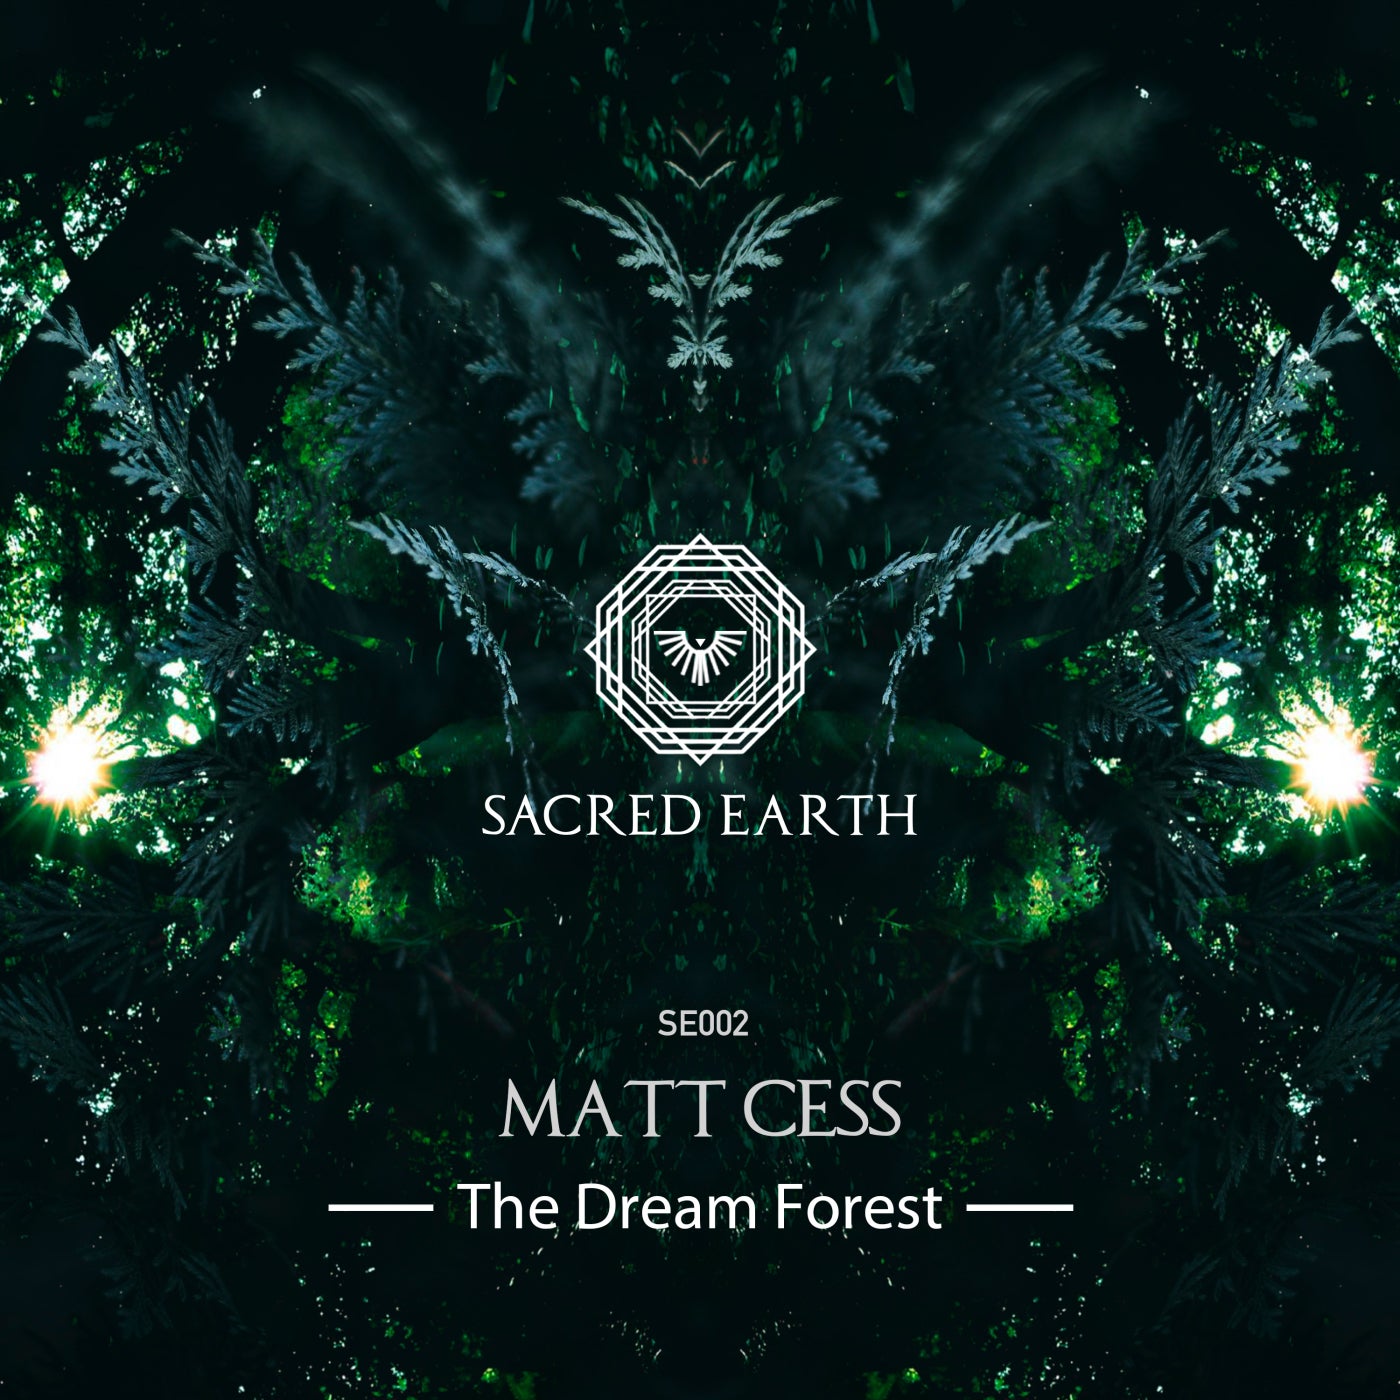 The Dream Forest